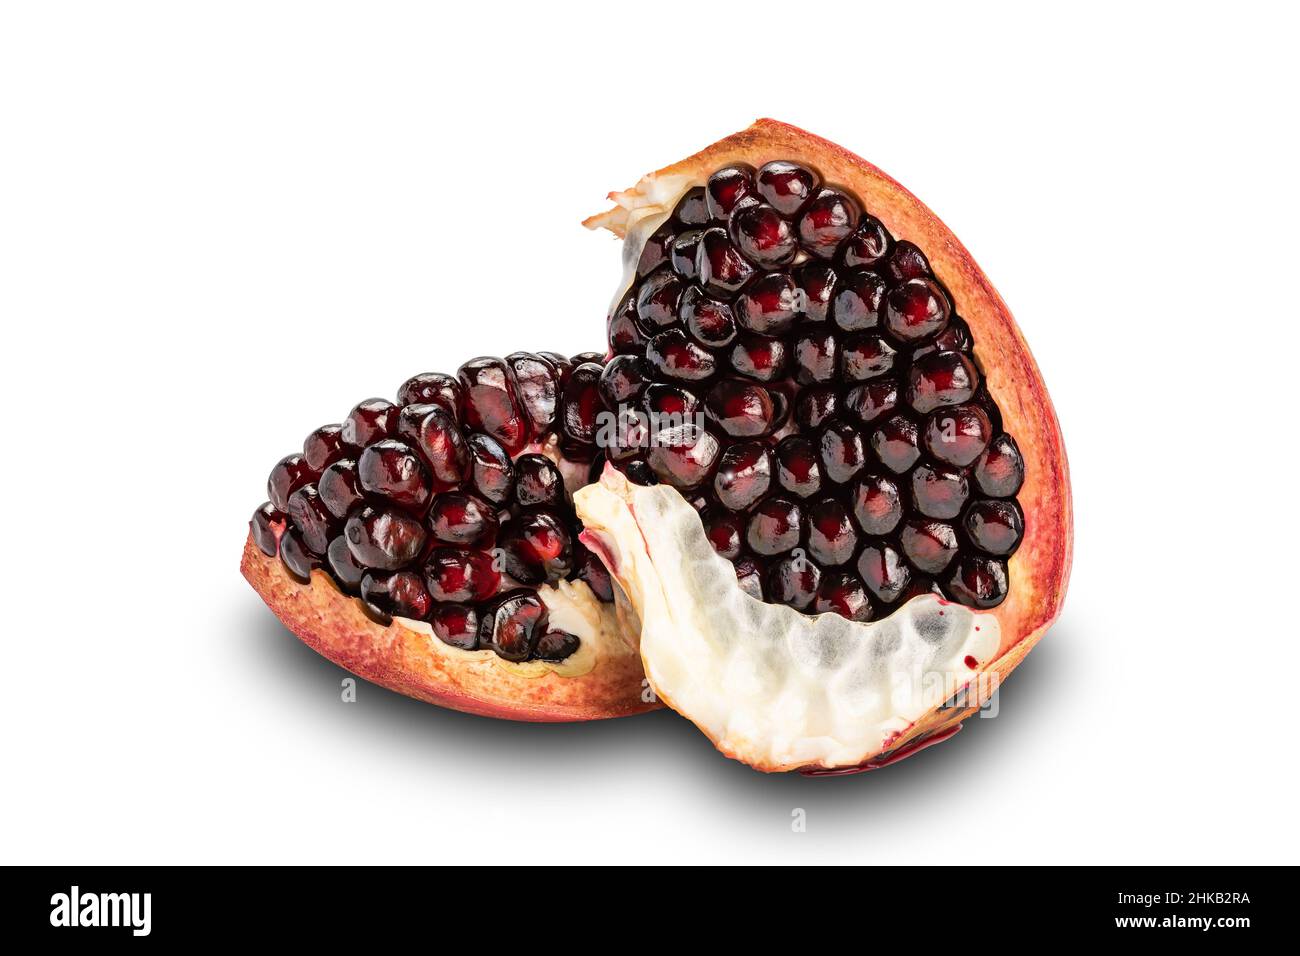 Side view slices of ripe sweet pomegranate isolated on white background with clipping path. Stock Photo